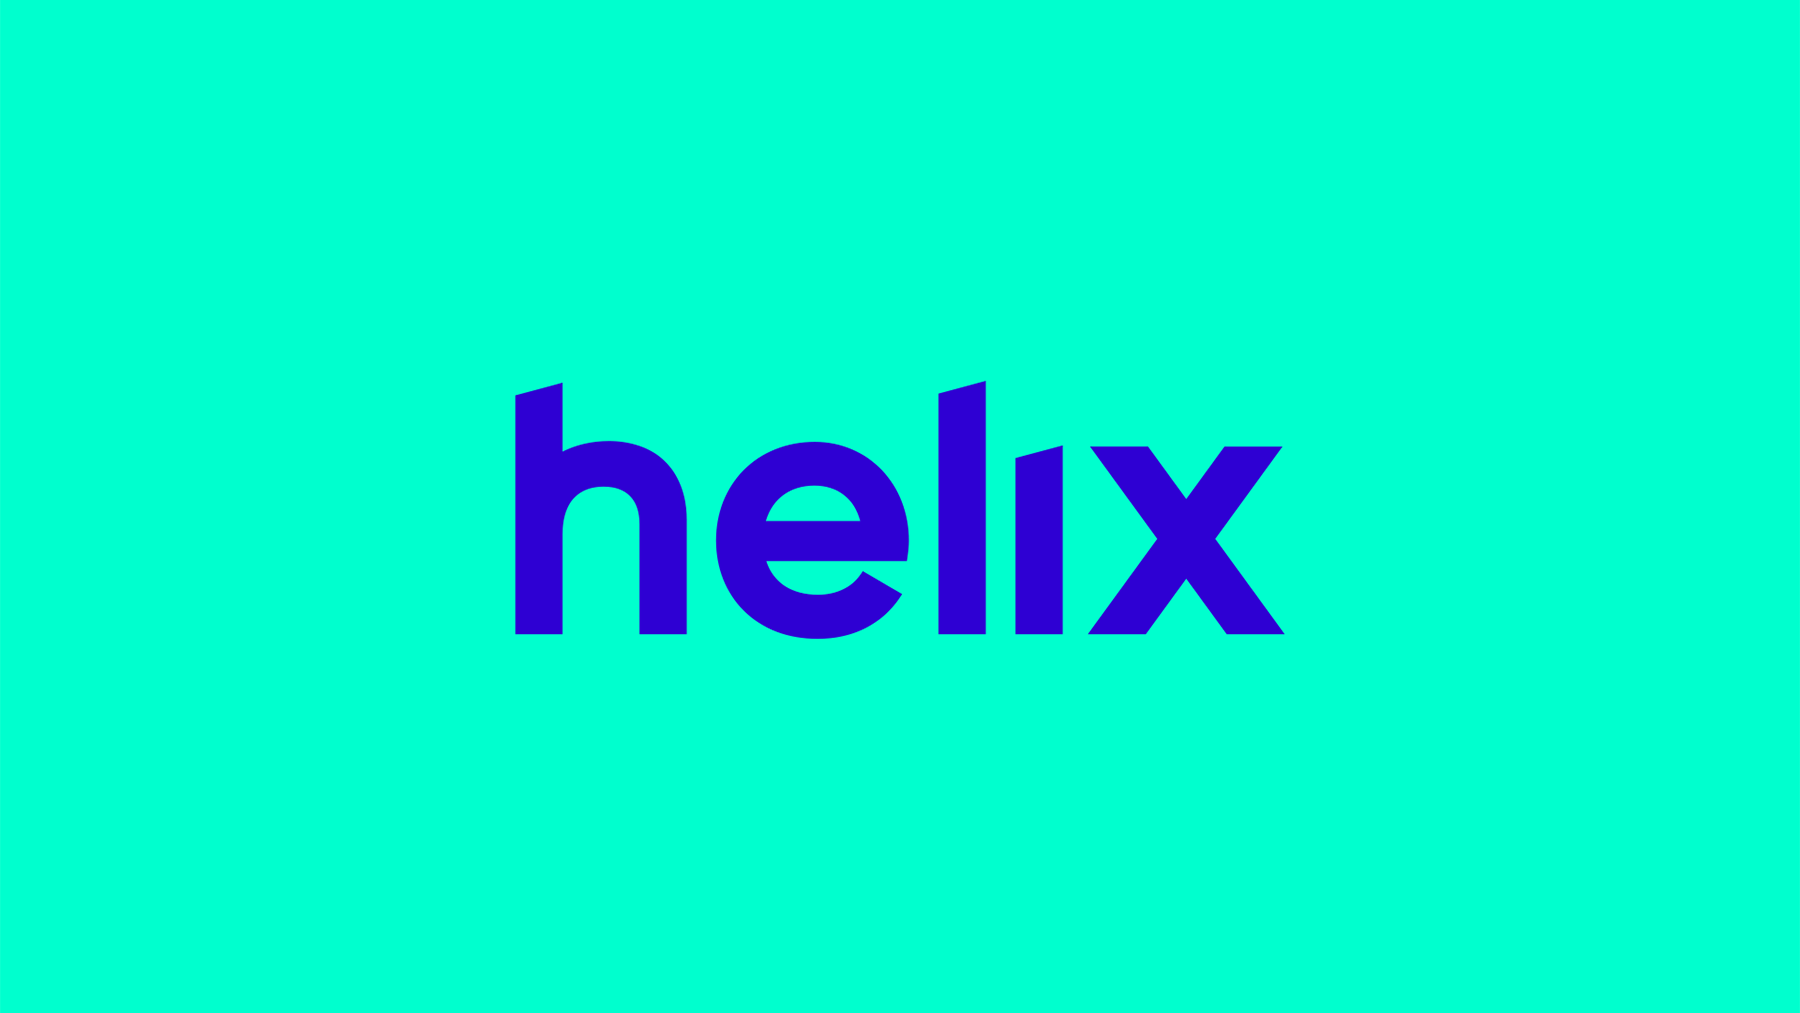 Helix logo design for limited use.